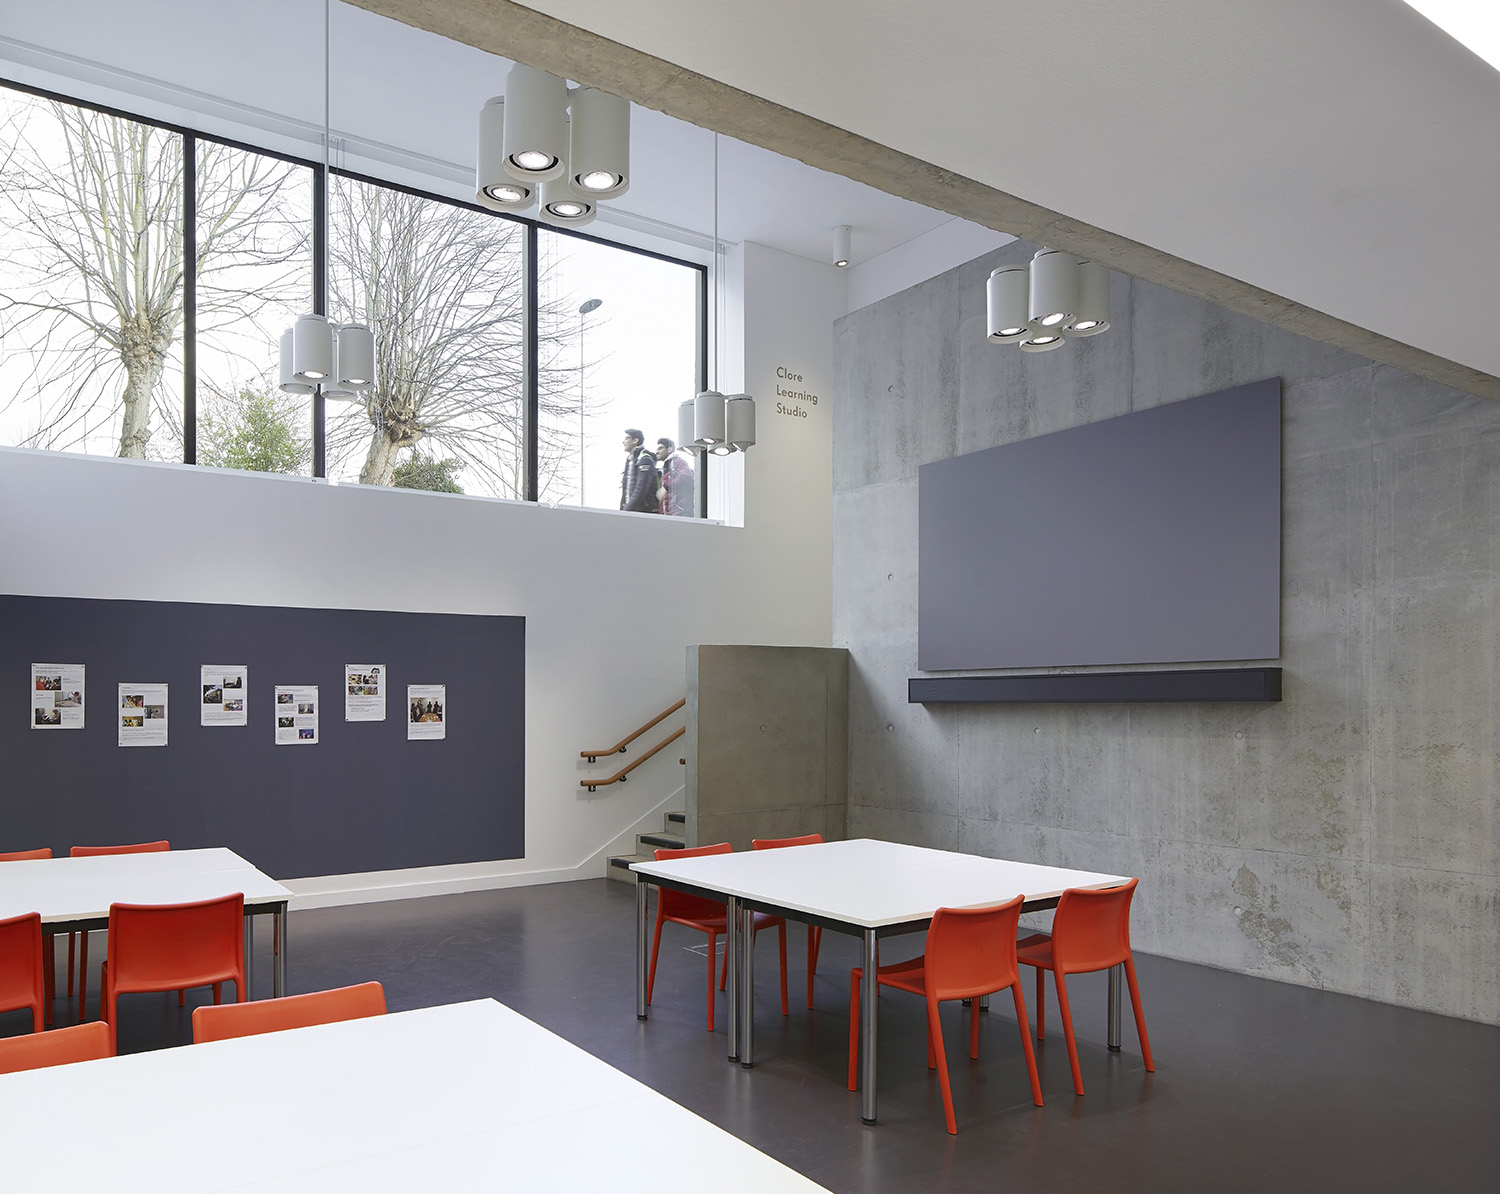 An image of the tables and chairs in the Clore Learning Studio at Kettles Yard, Cambridge